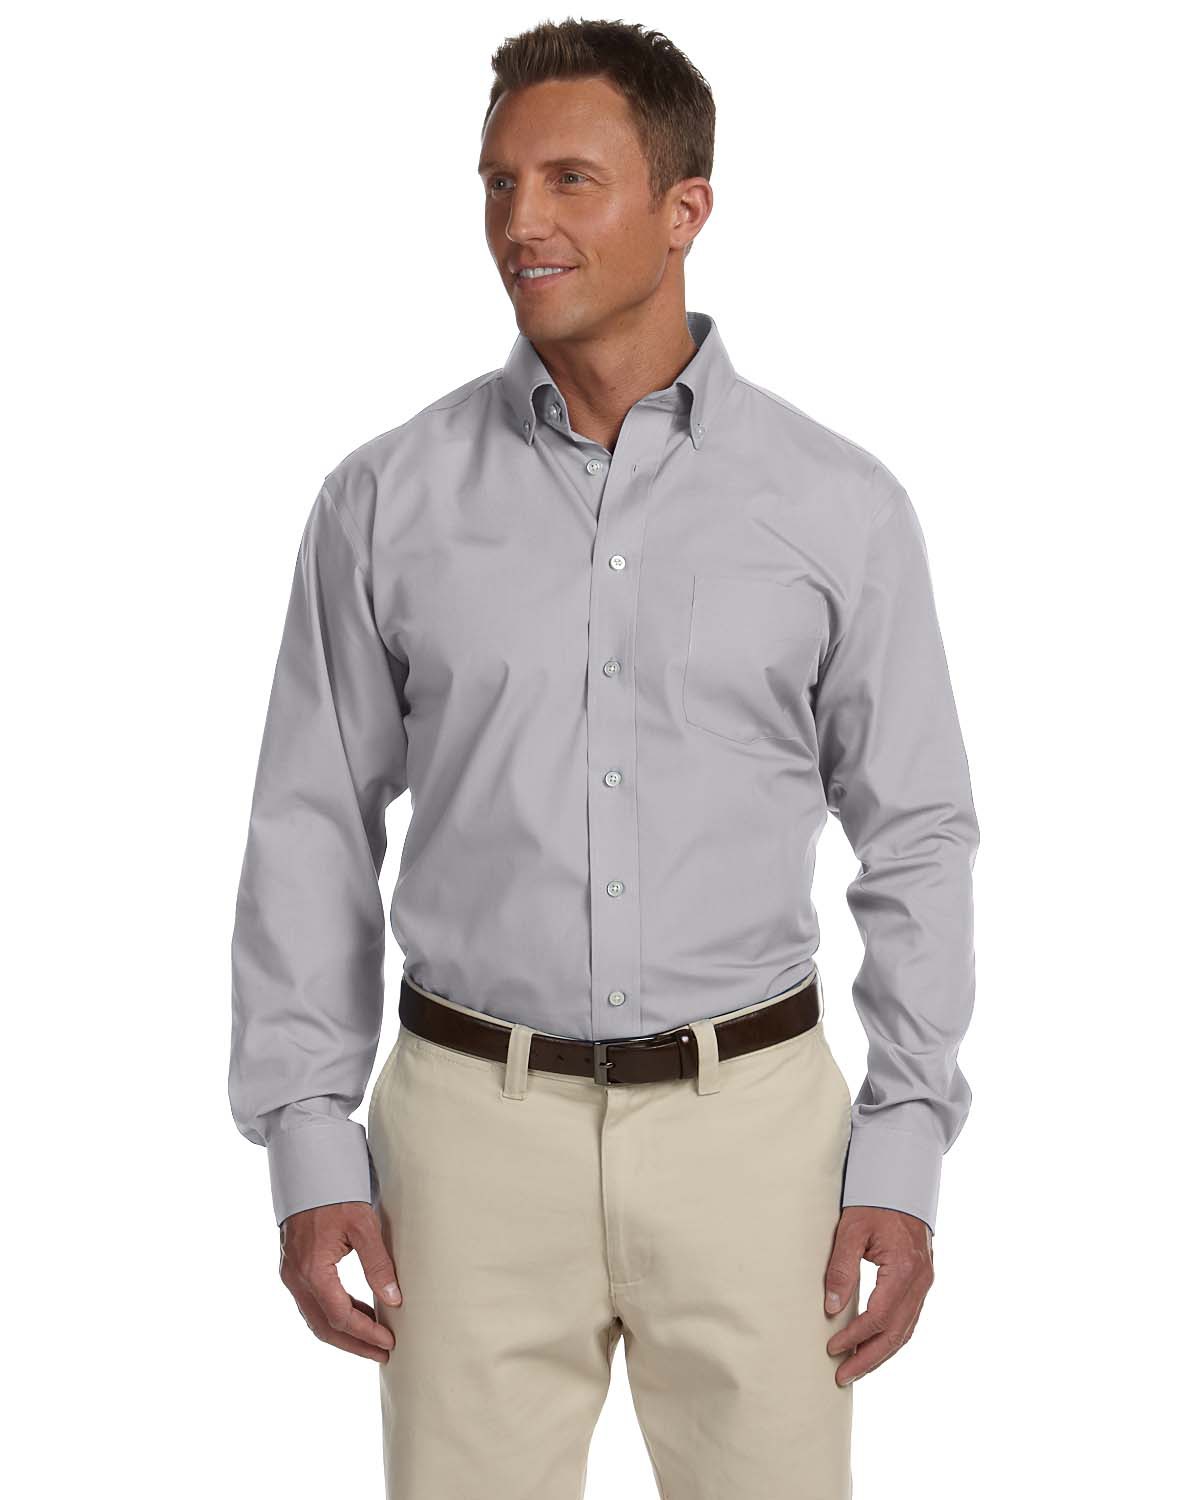 Chestnut Hill CH600  Men's Executive Performance Broadcloth